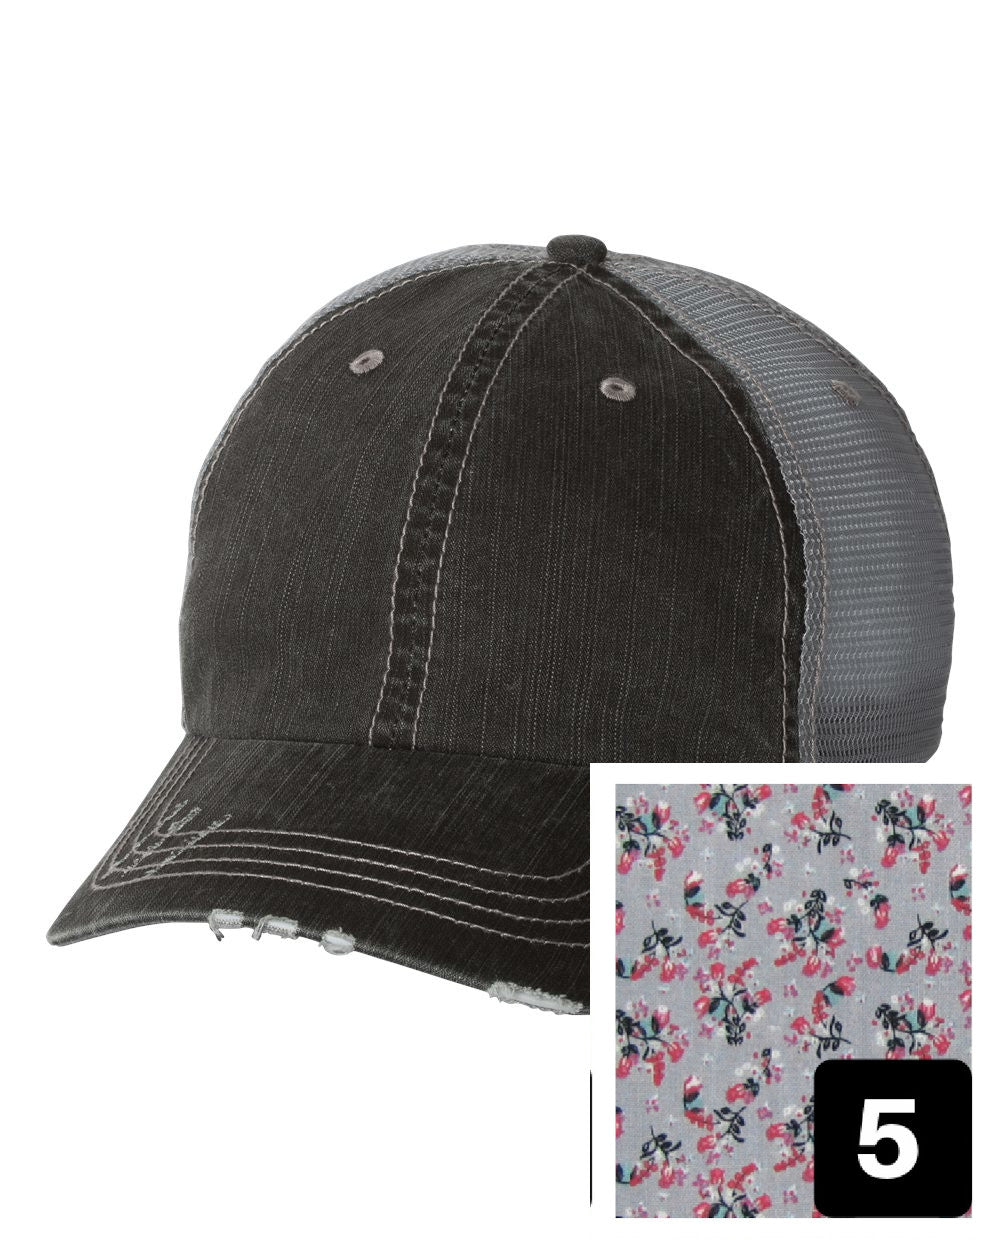 gray distressed trucker hat with purple and pink floral fabric state of New Jersey